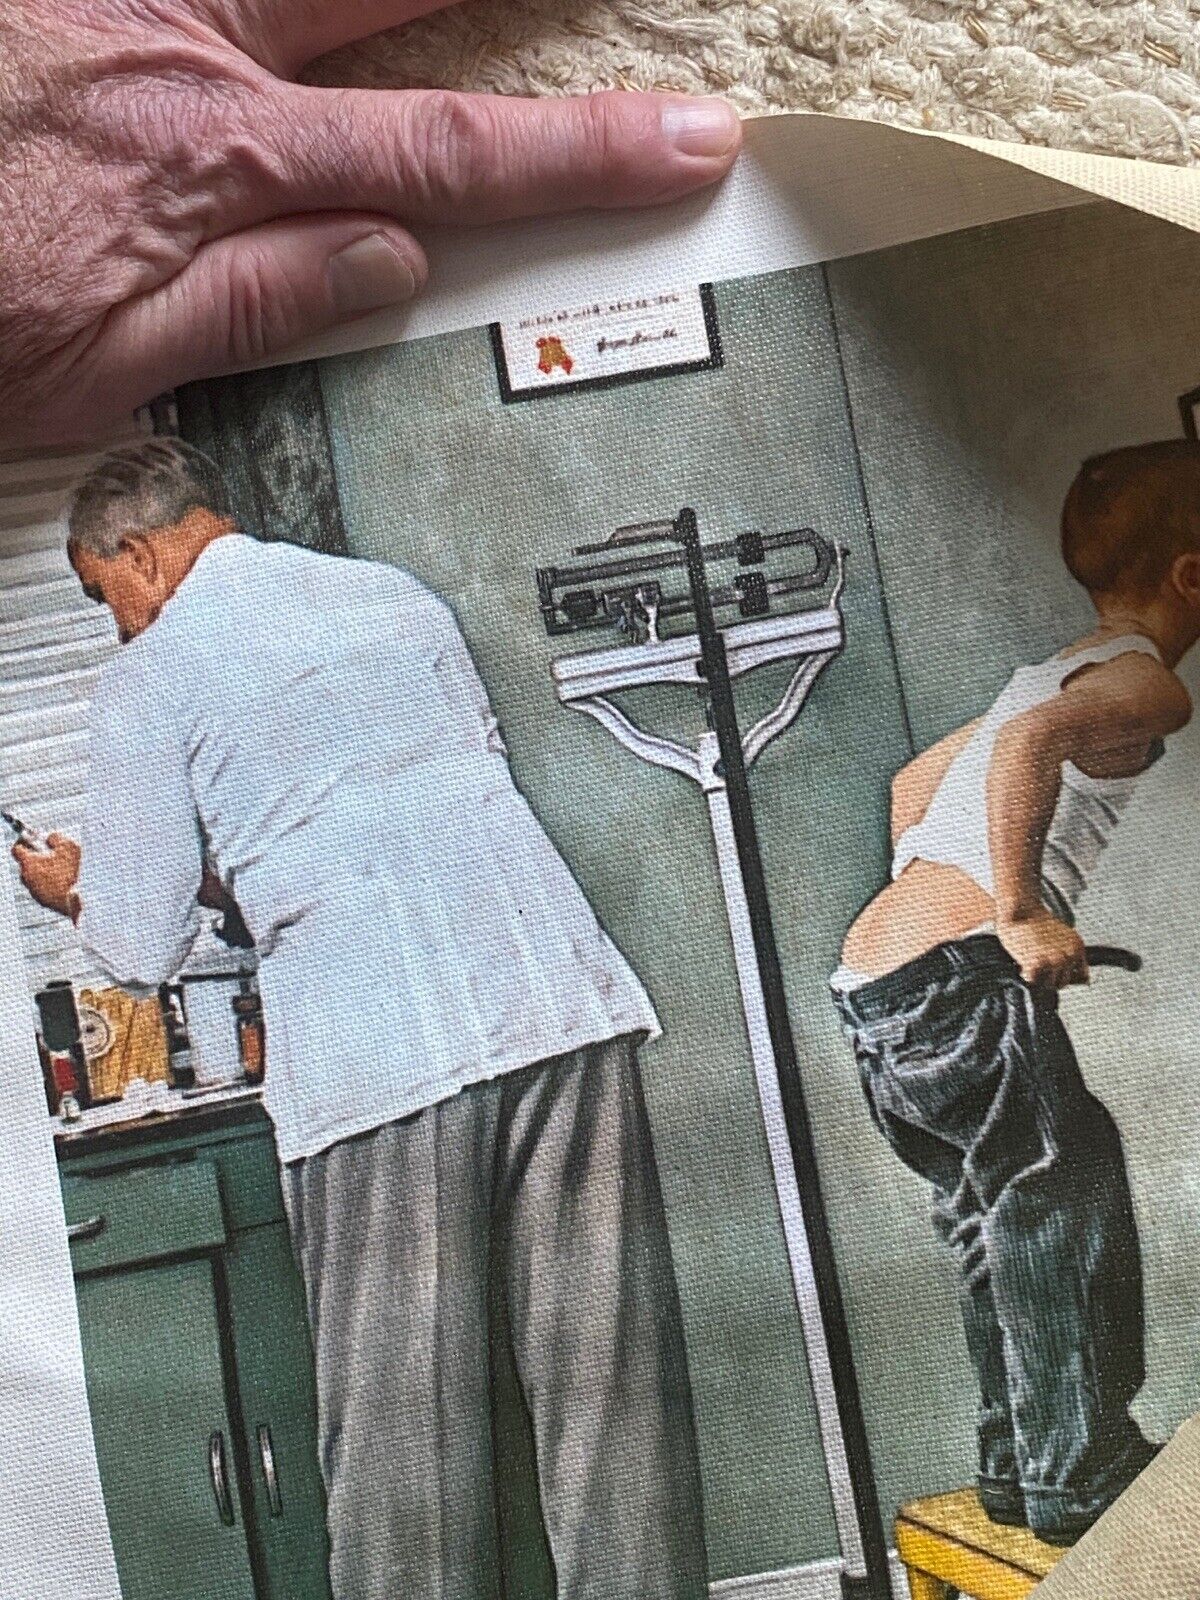 Norman Rockwell Vinyl Prints “At The Doctors” 1974 4 Rolled Vintage Art